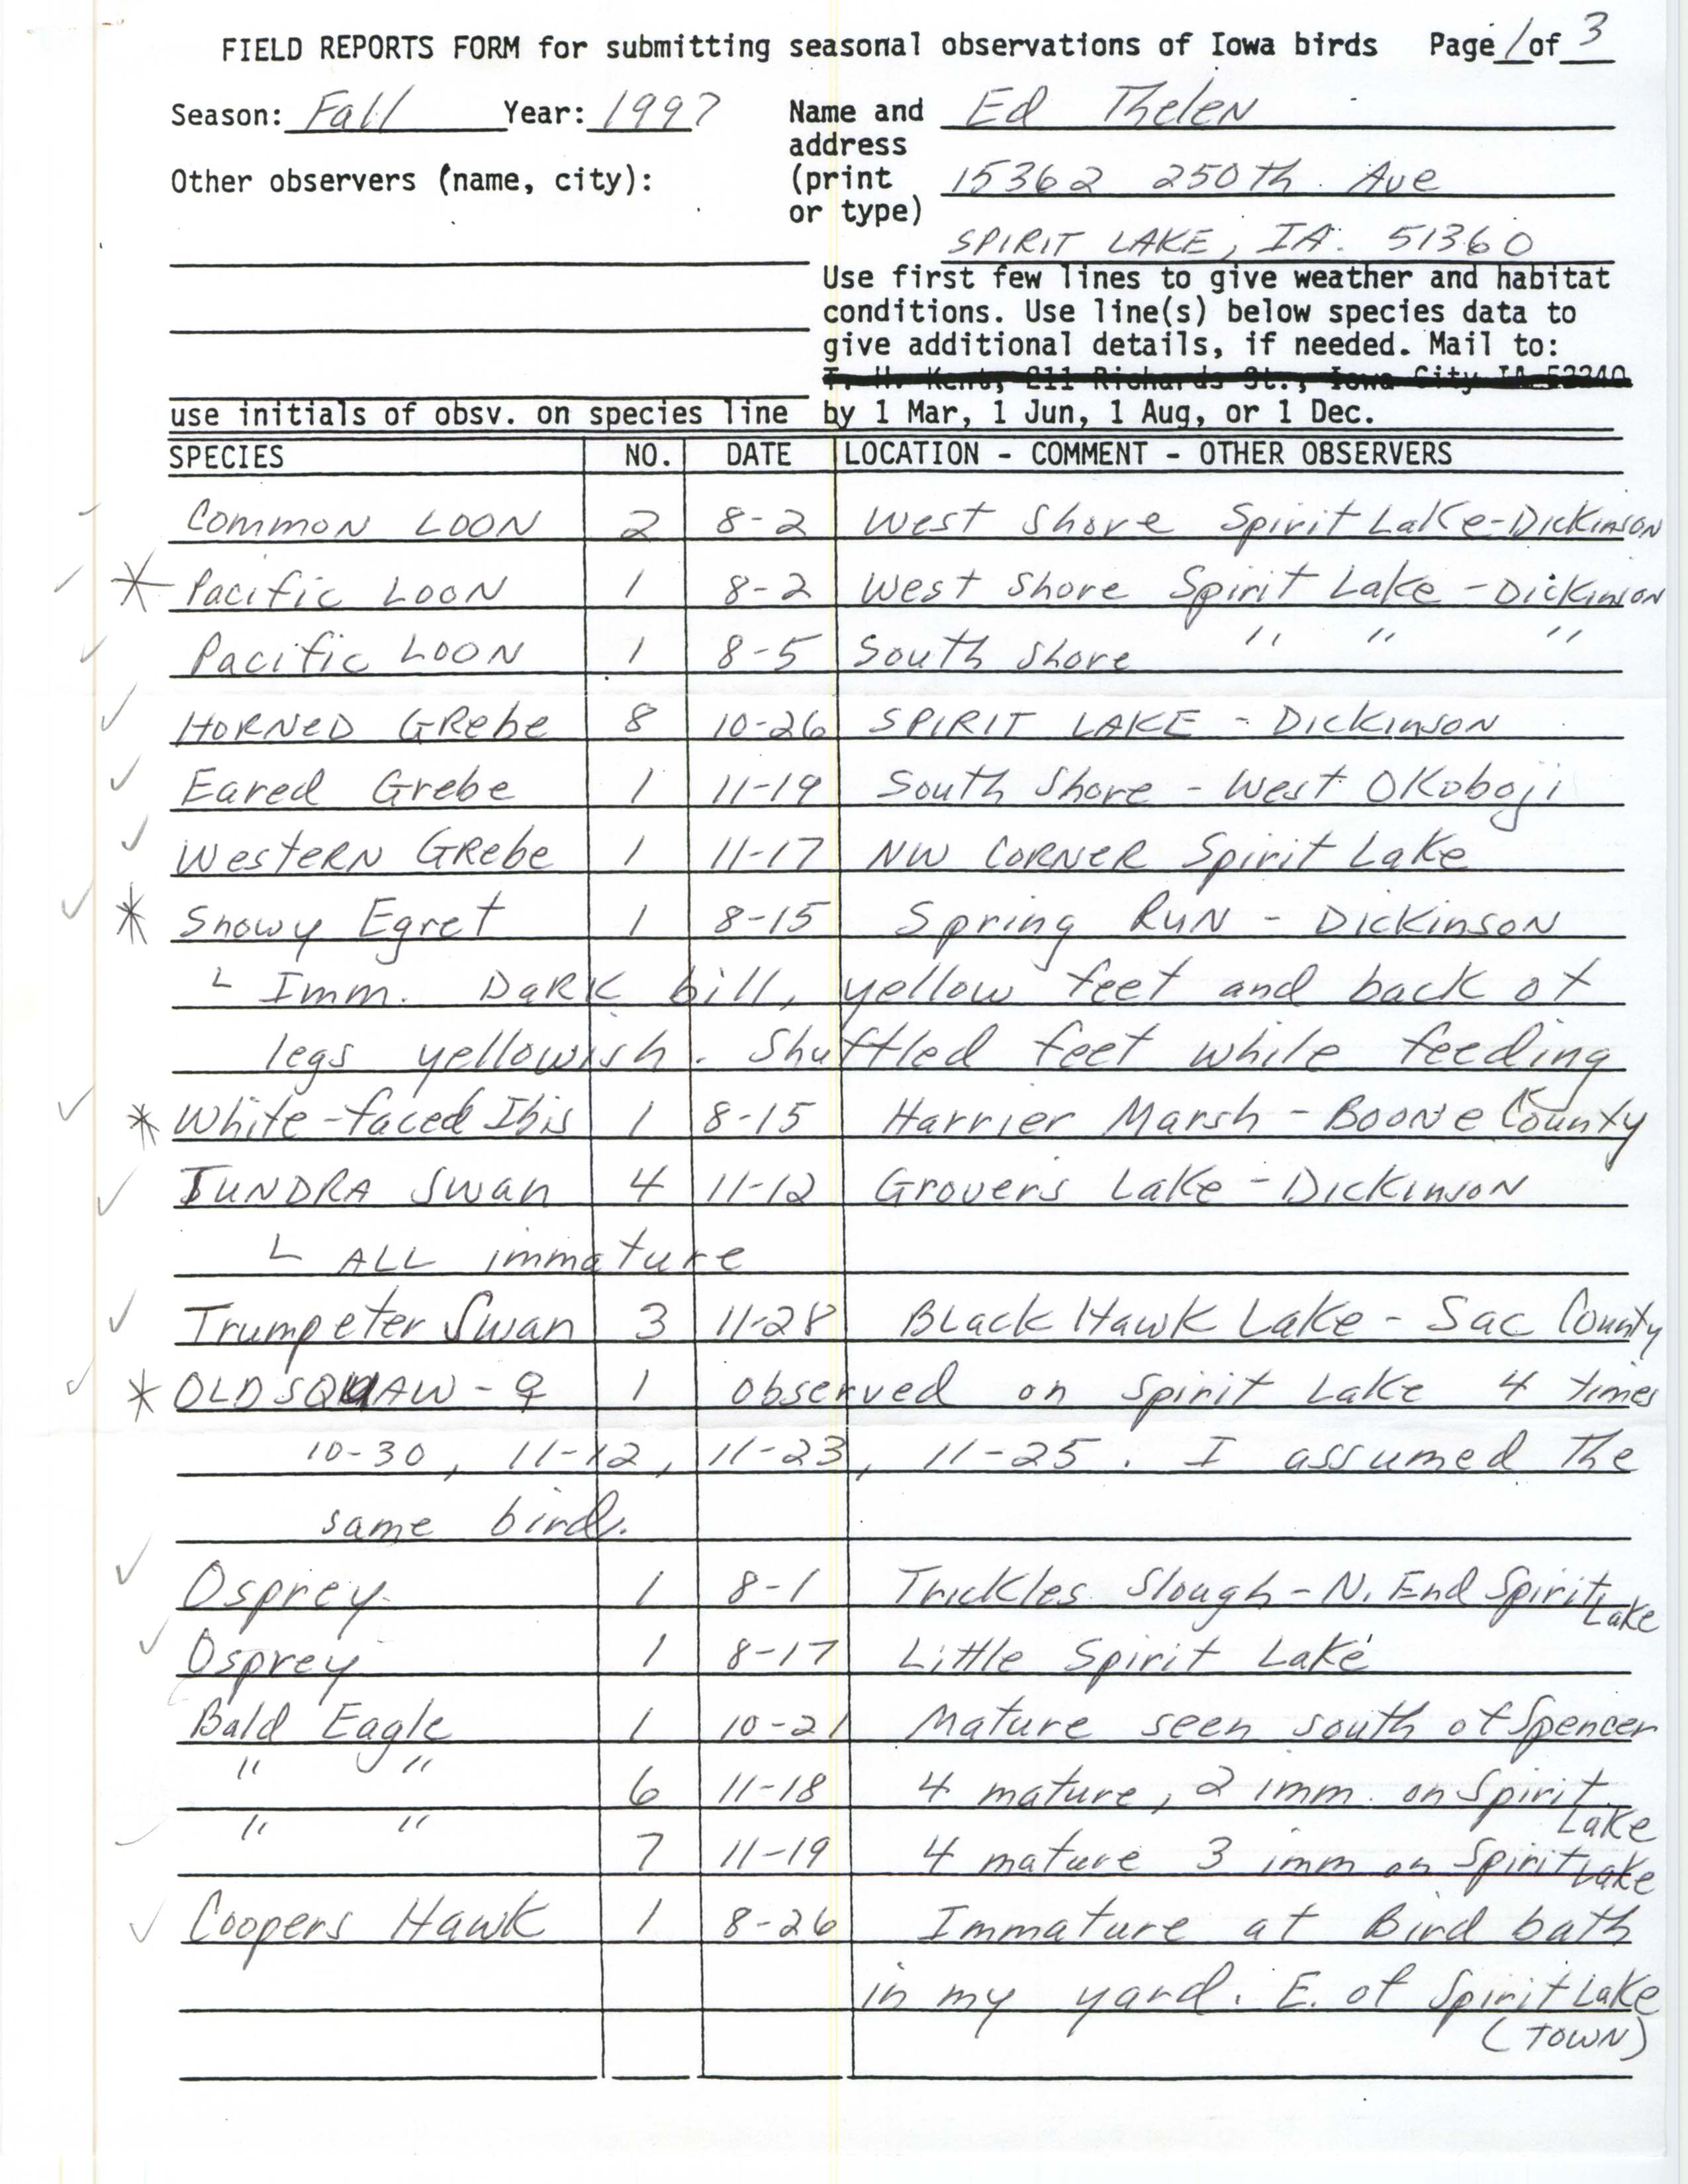 Field reports form for submitting seasonal observations of Iowa birds, Ed Thelen, fall 1997